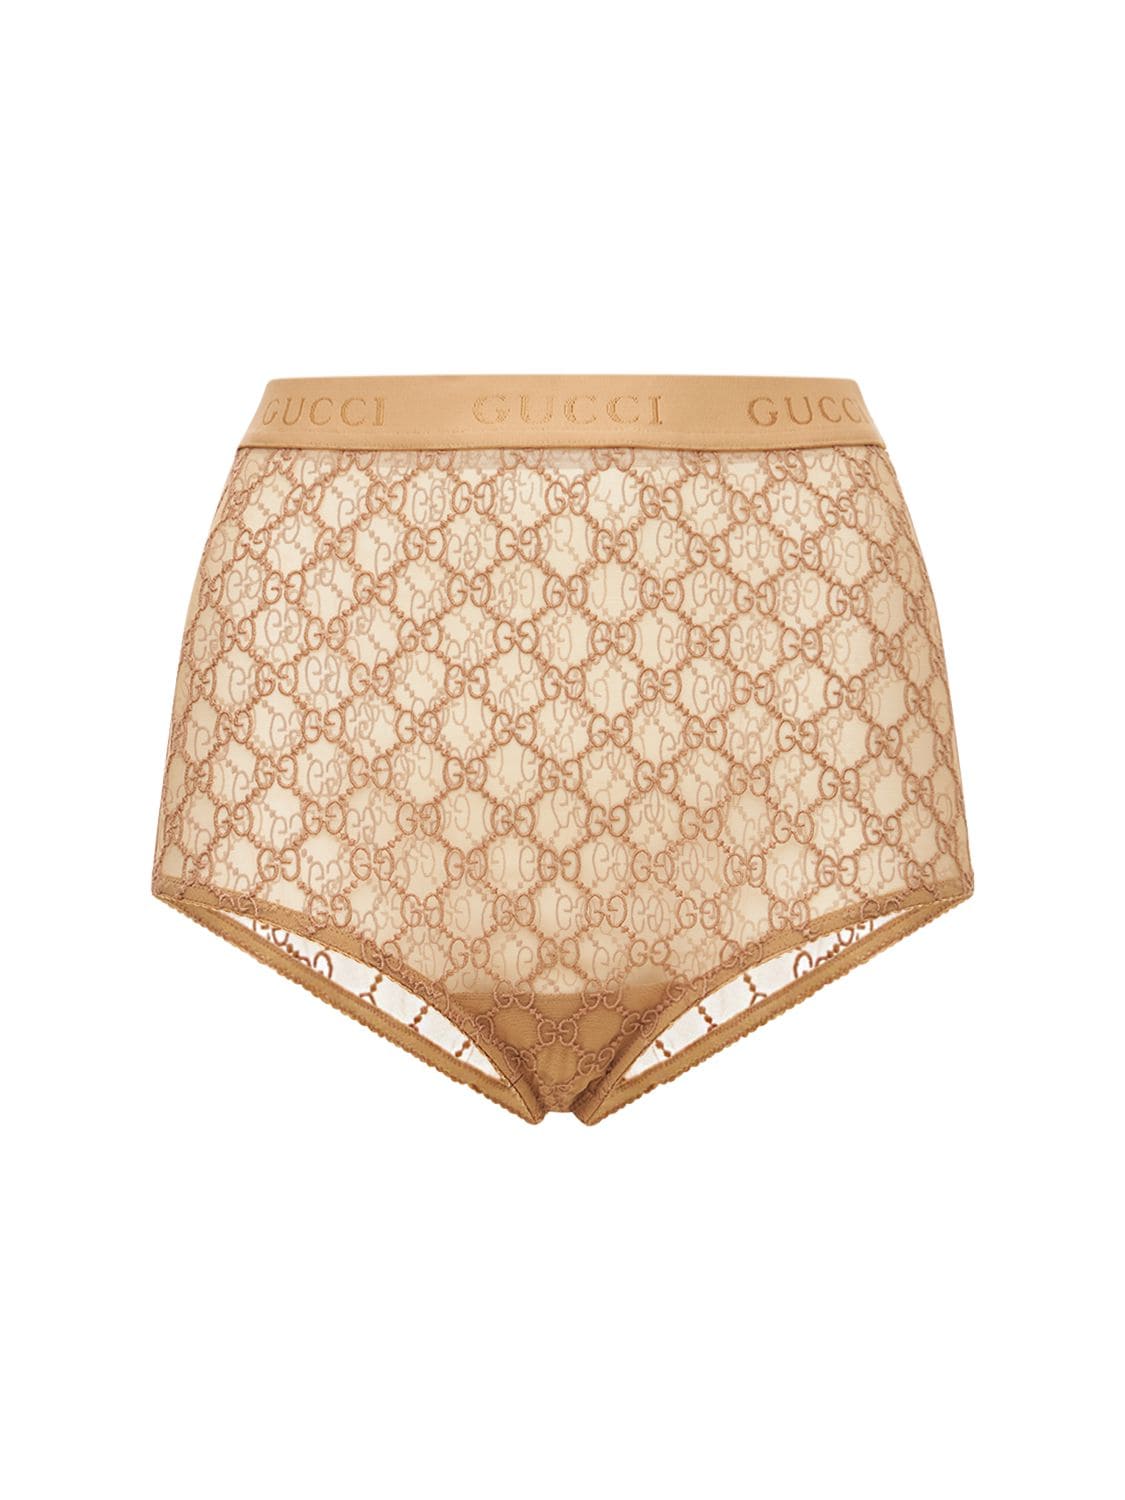 GUCCI Tulle Lace Briefs for Women